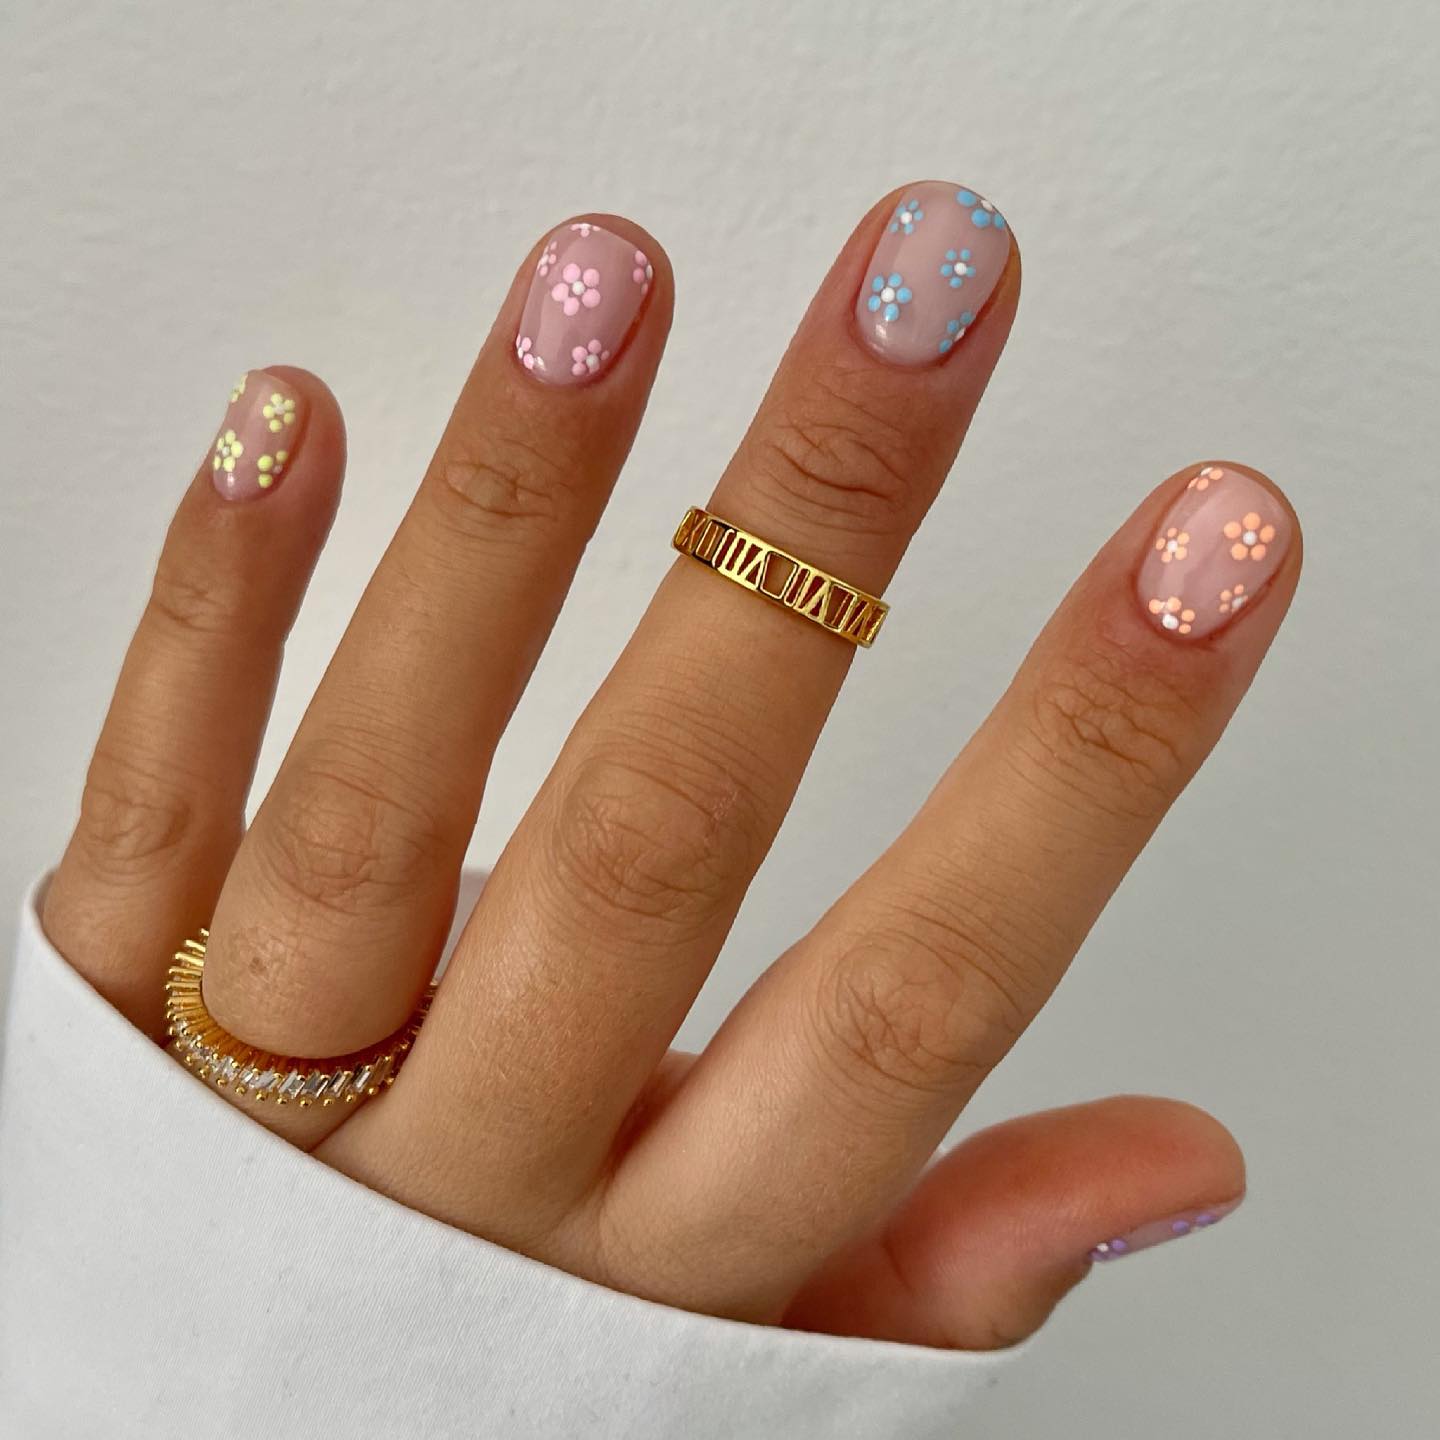 Wanna have a delicate and cute daisy nail art? Then, why don't you have daisies with different colors in each nail.